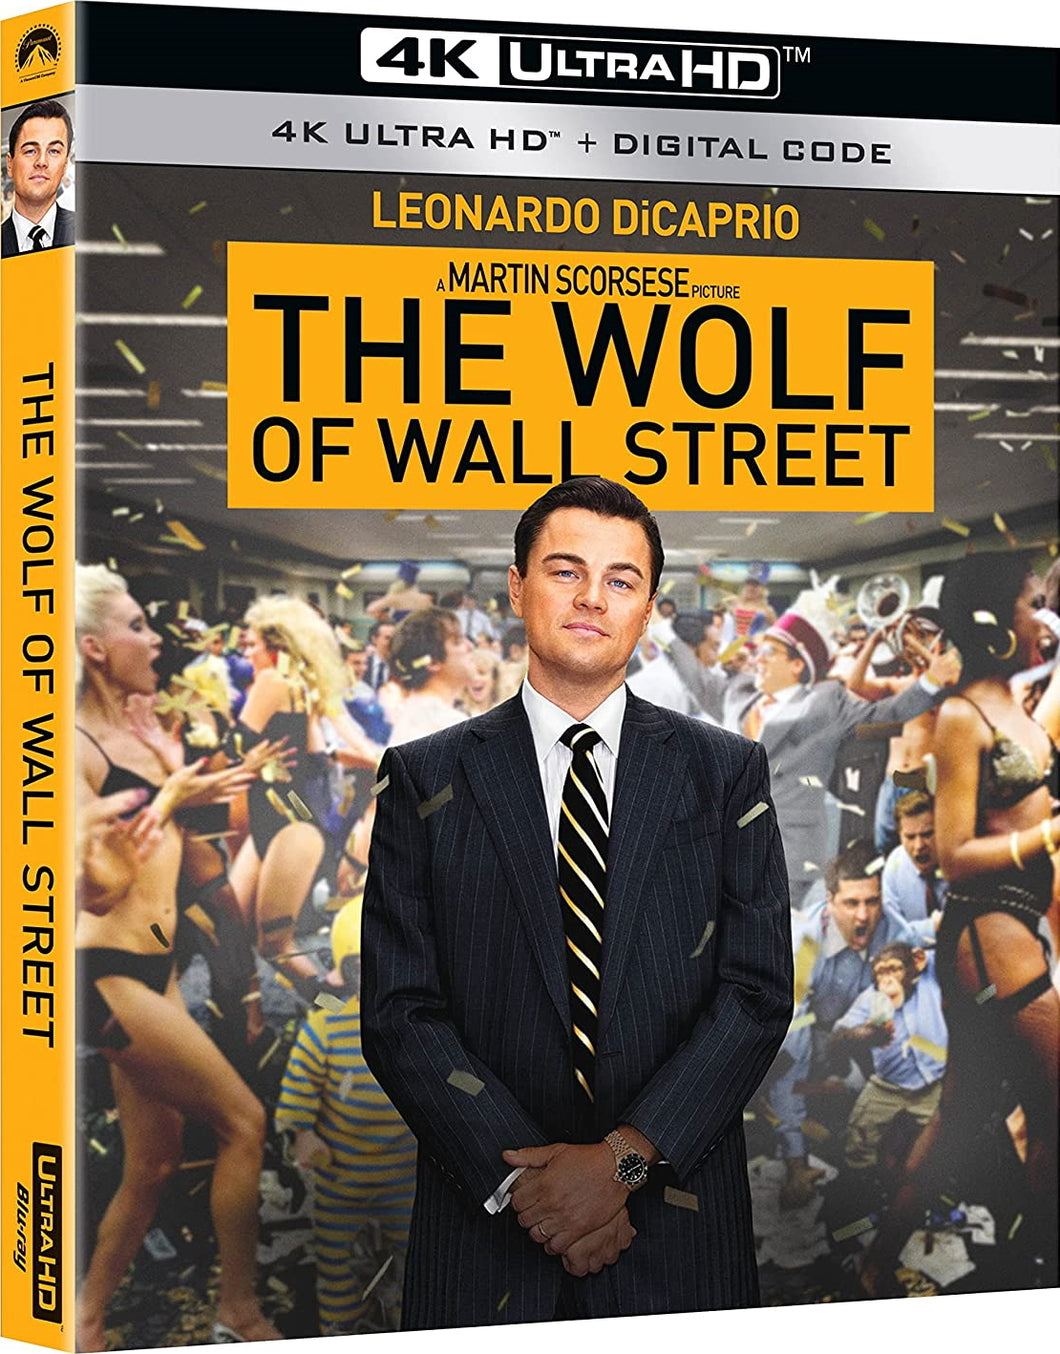 The Wolf of Wall Street 4K (2013) de Martin Scorsese - front cover